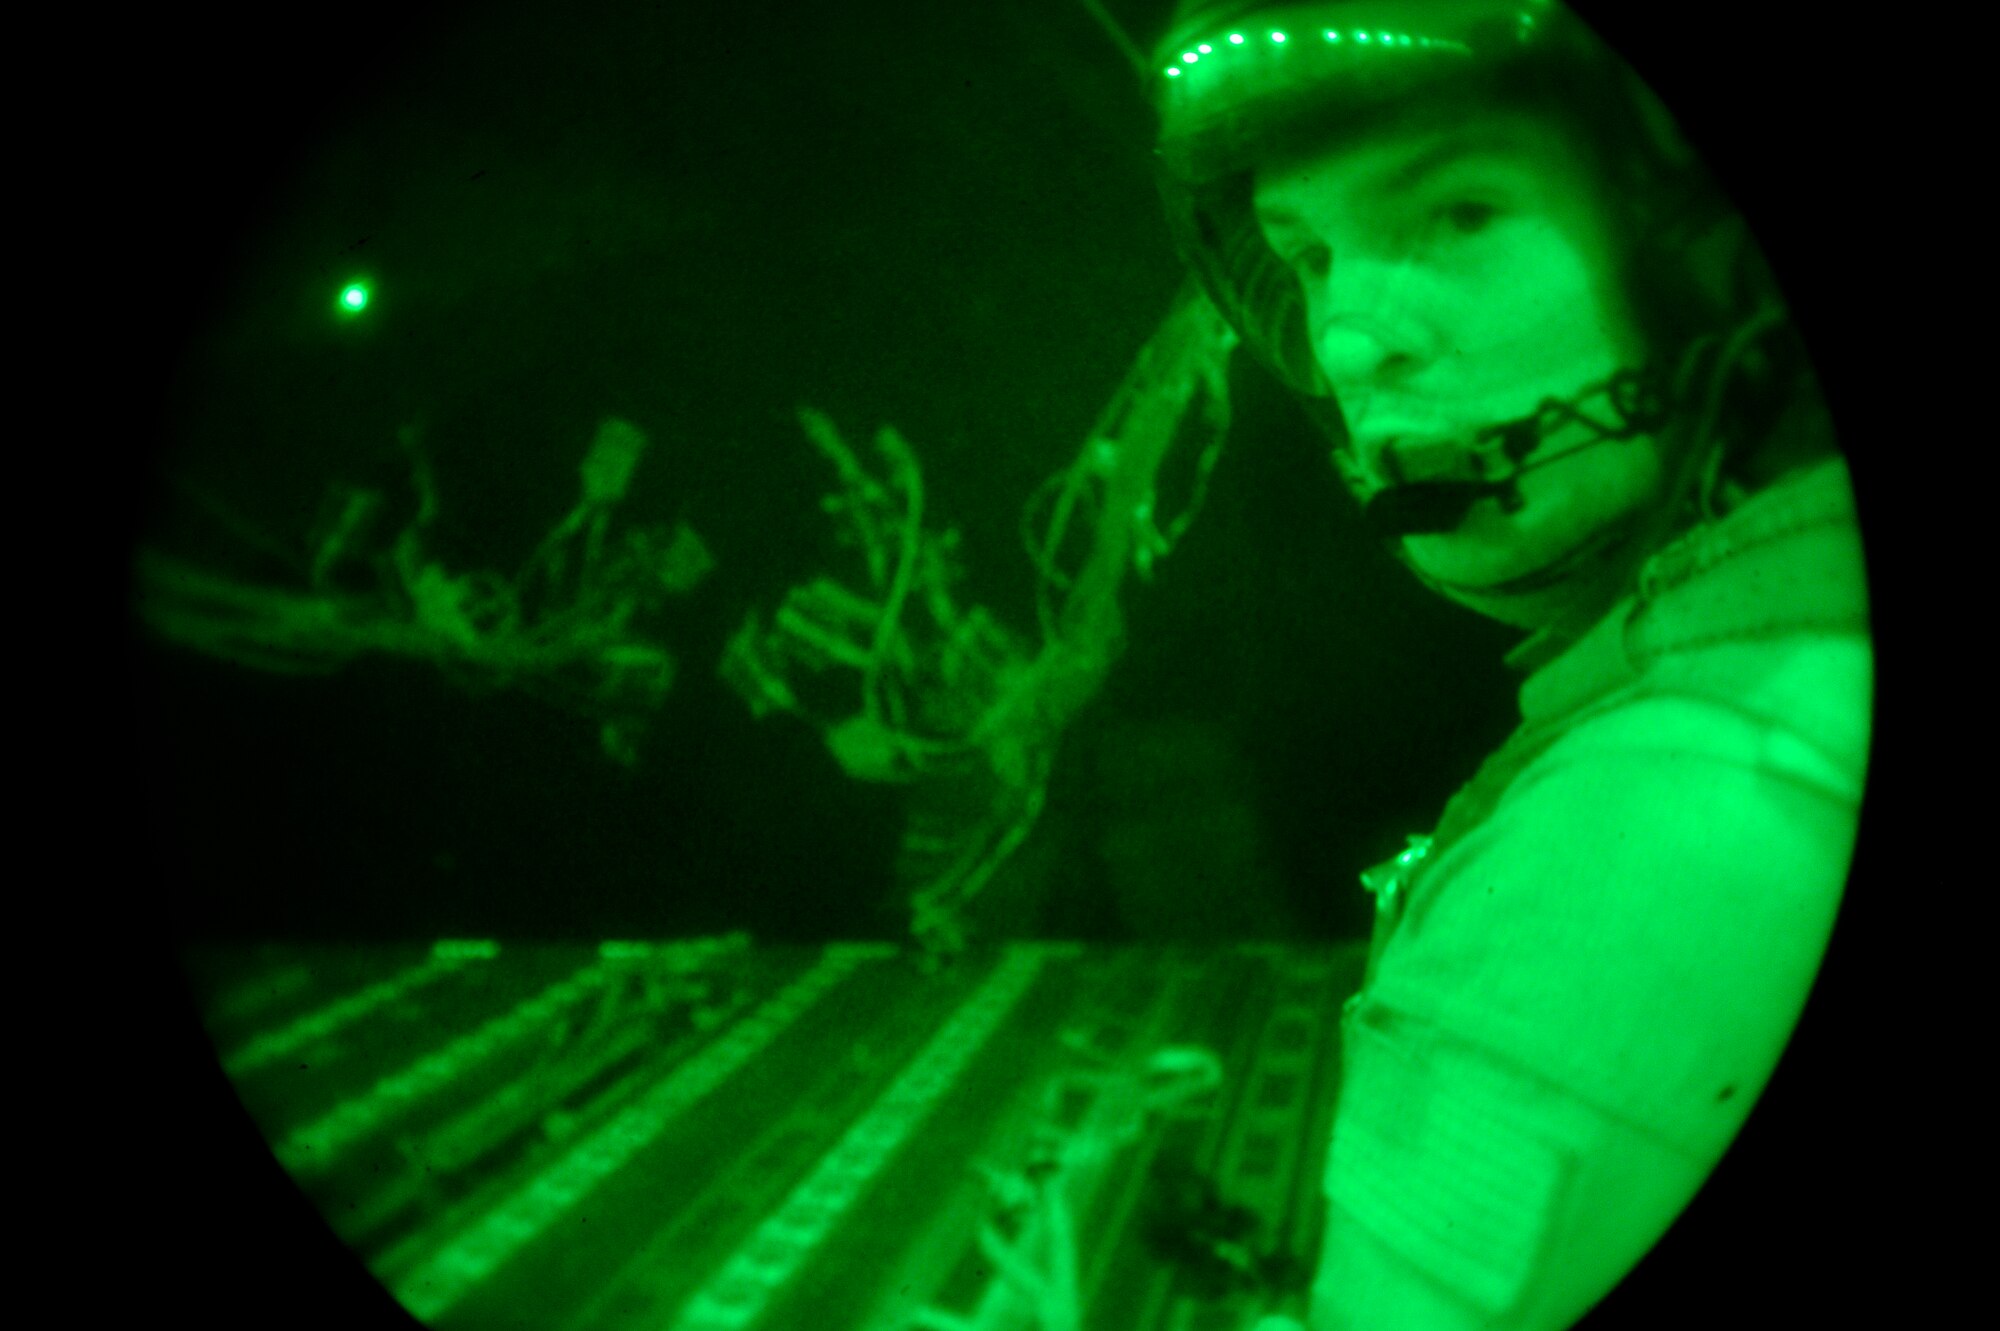 U.S. Air Force Senior Airman Bryce Kester, a loadmaster from the 817th Expeditionary Airlift Squadron, monitors supplies being dropped from a C-17 Globemaster III to a forward operating base in Afghanistan, Aug. 27, 2009, in support of Operation Enduring Freedom.  Airman Kester is deployed from McChord Air Force Base, Wash.  (U.S. Air Force photo by Staff Sgt. Michael B. Keller) (Released)
